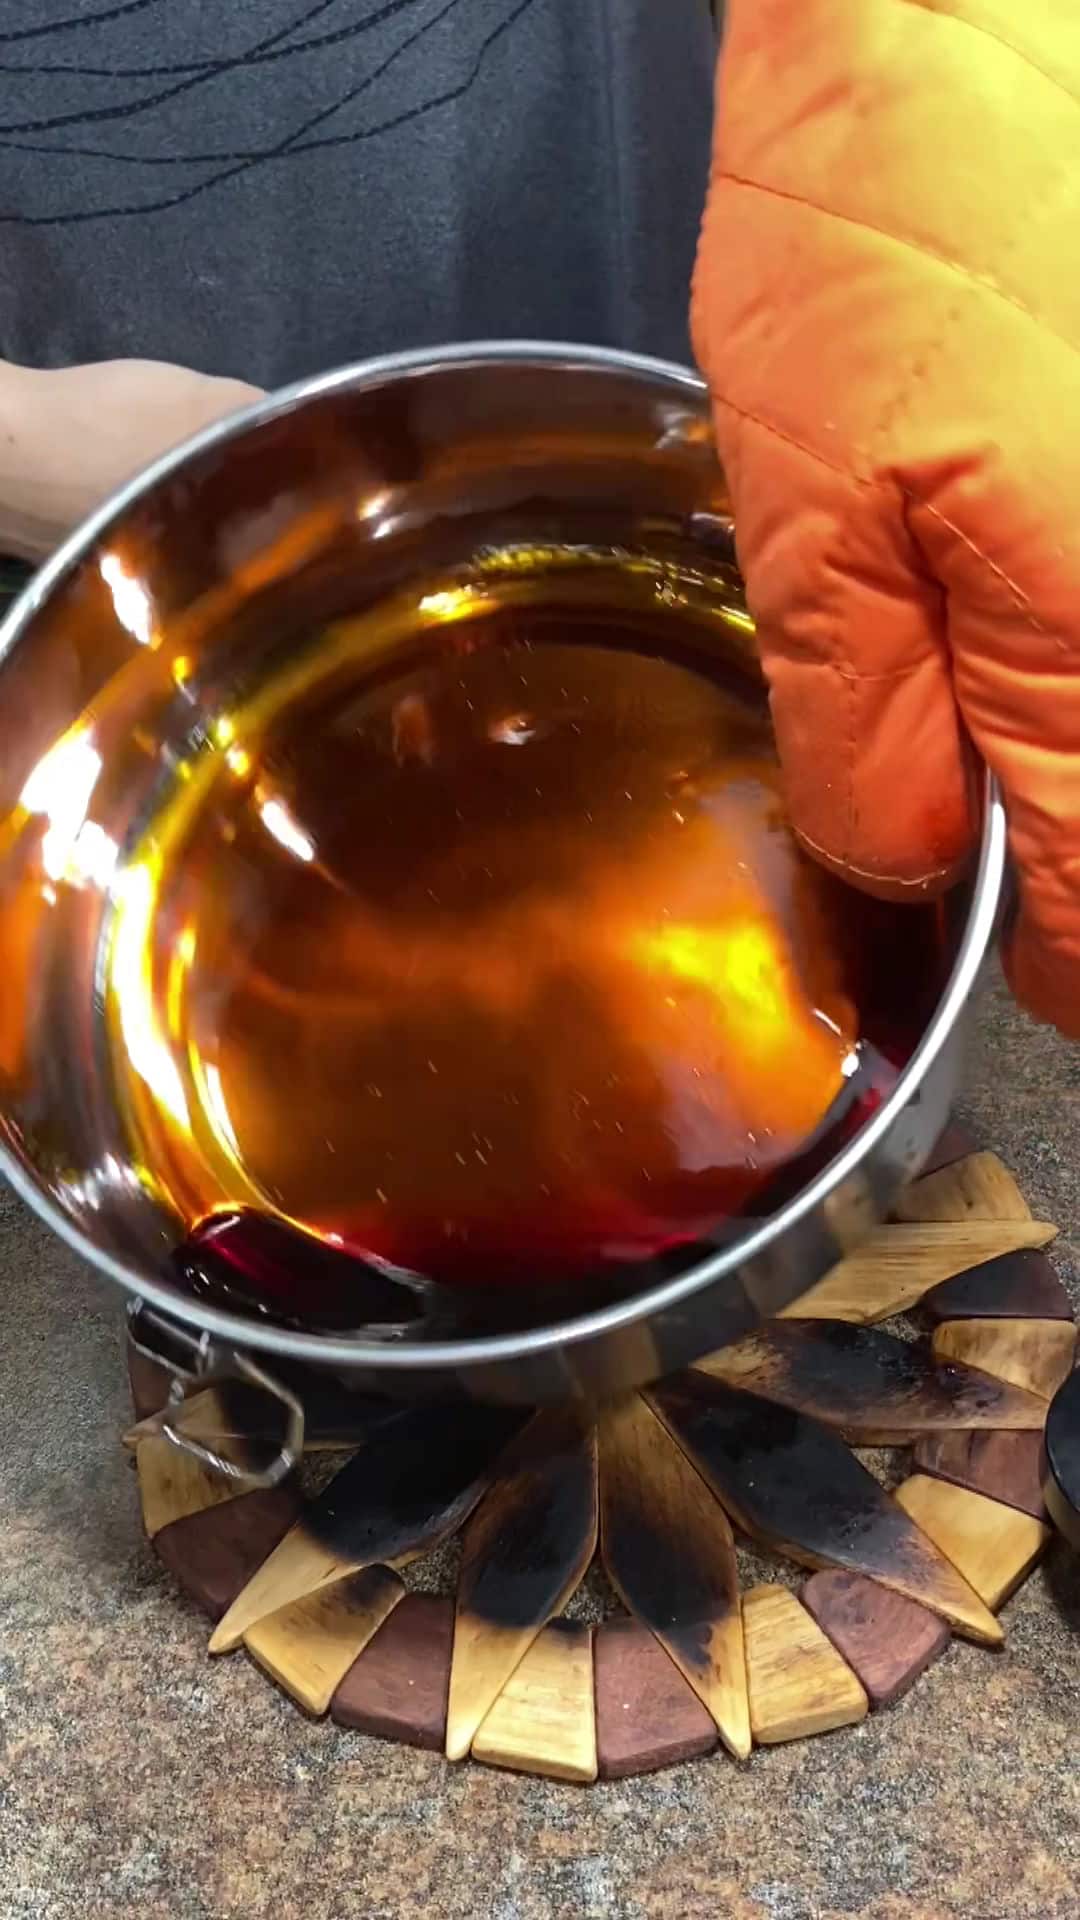 image of swirling sugar syrup caramel around the bottom of the flan pan